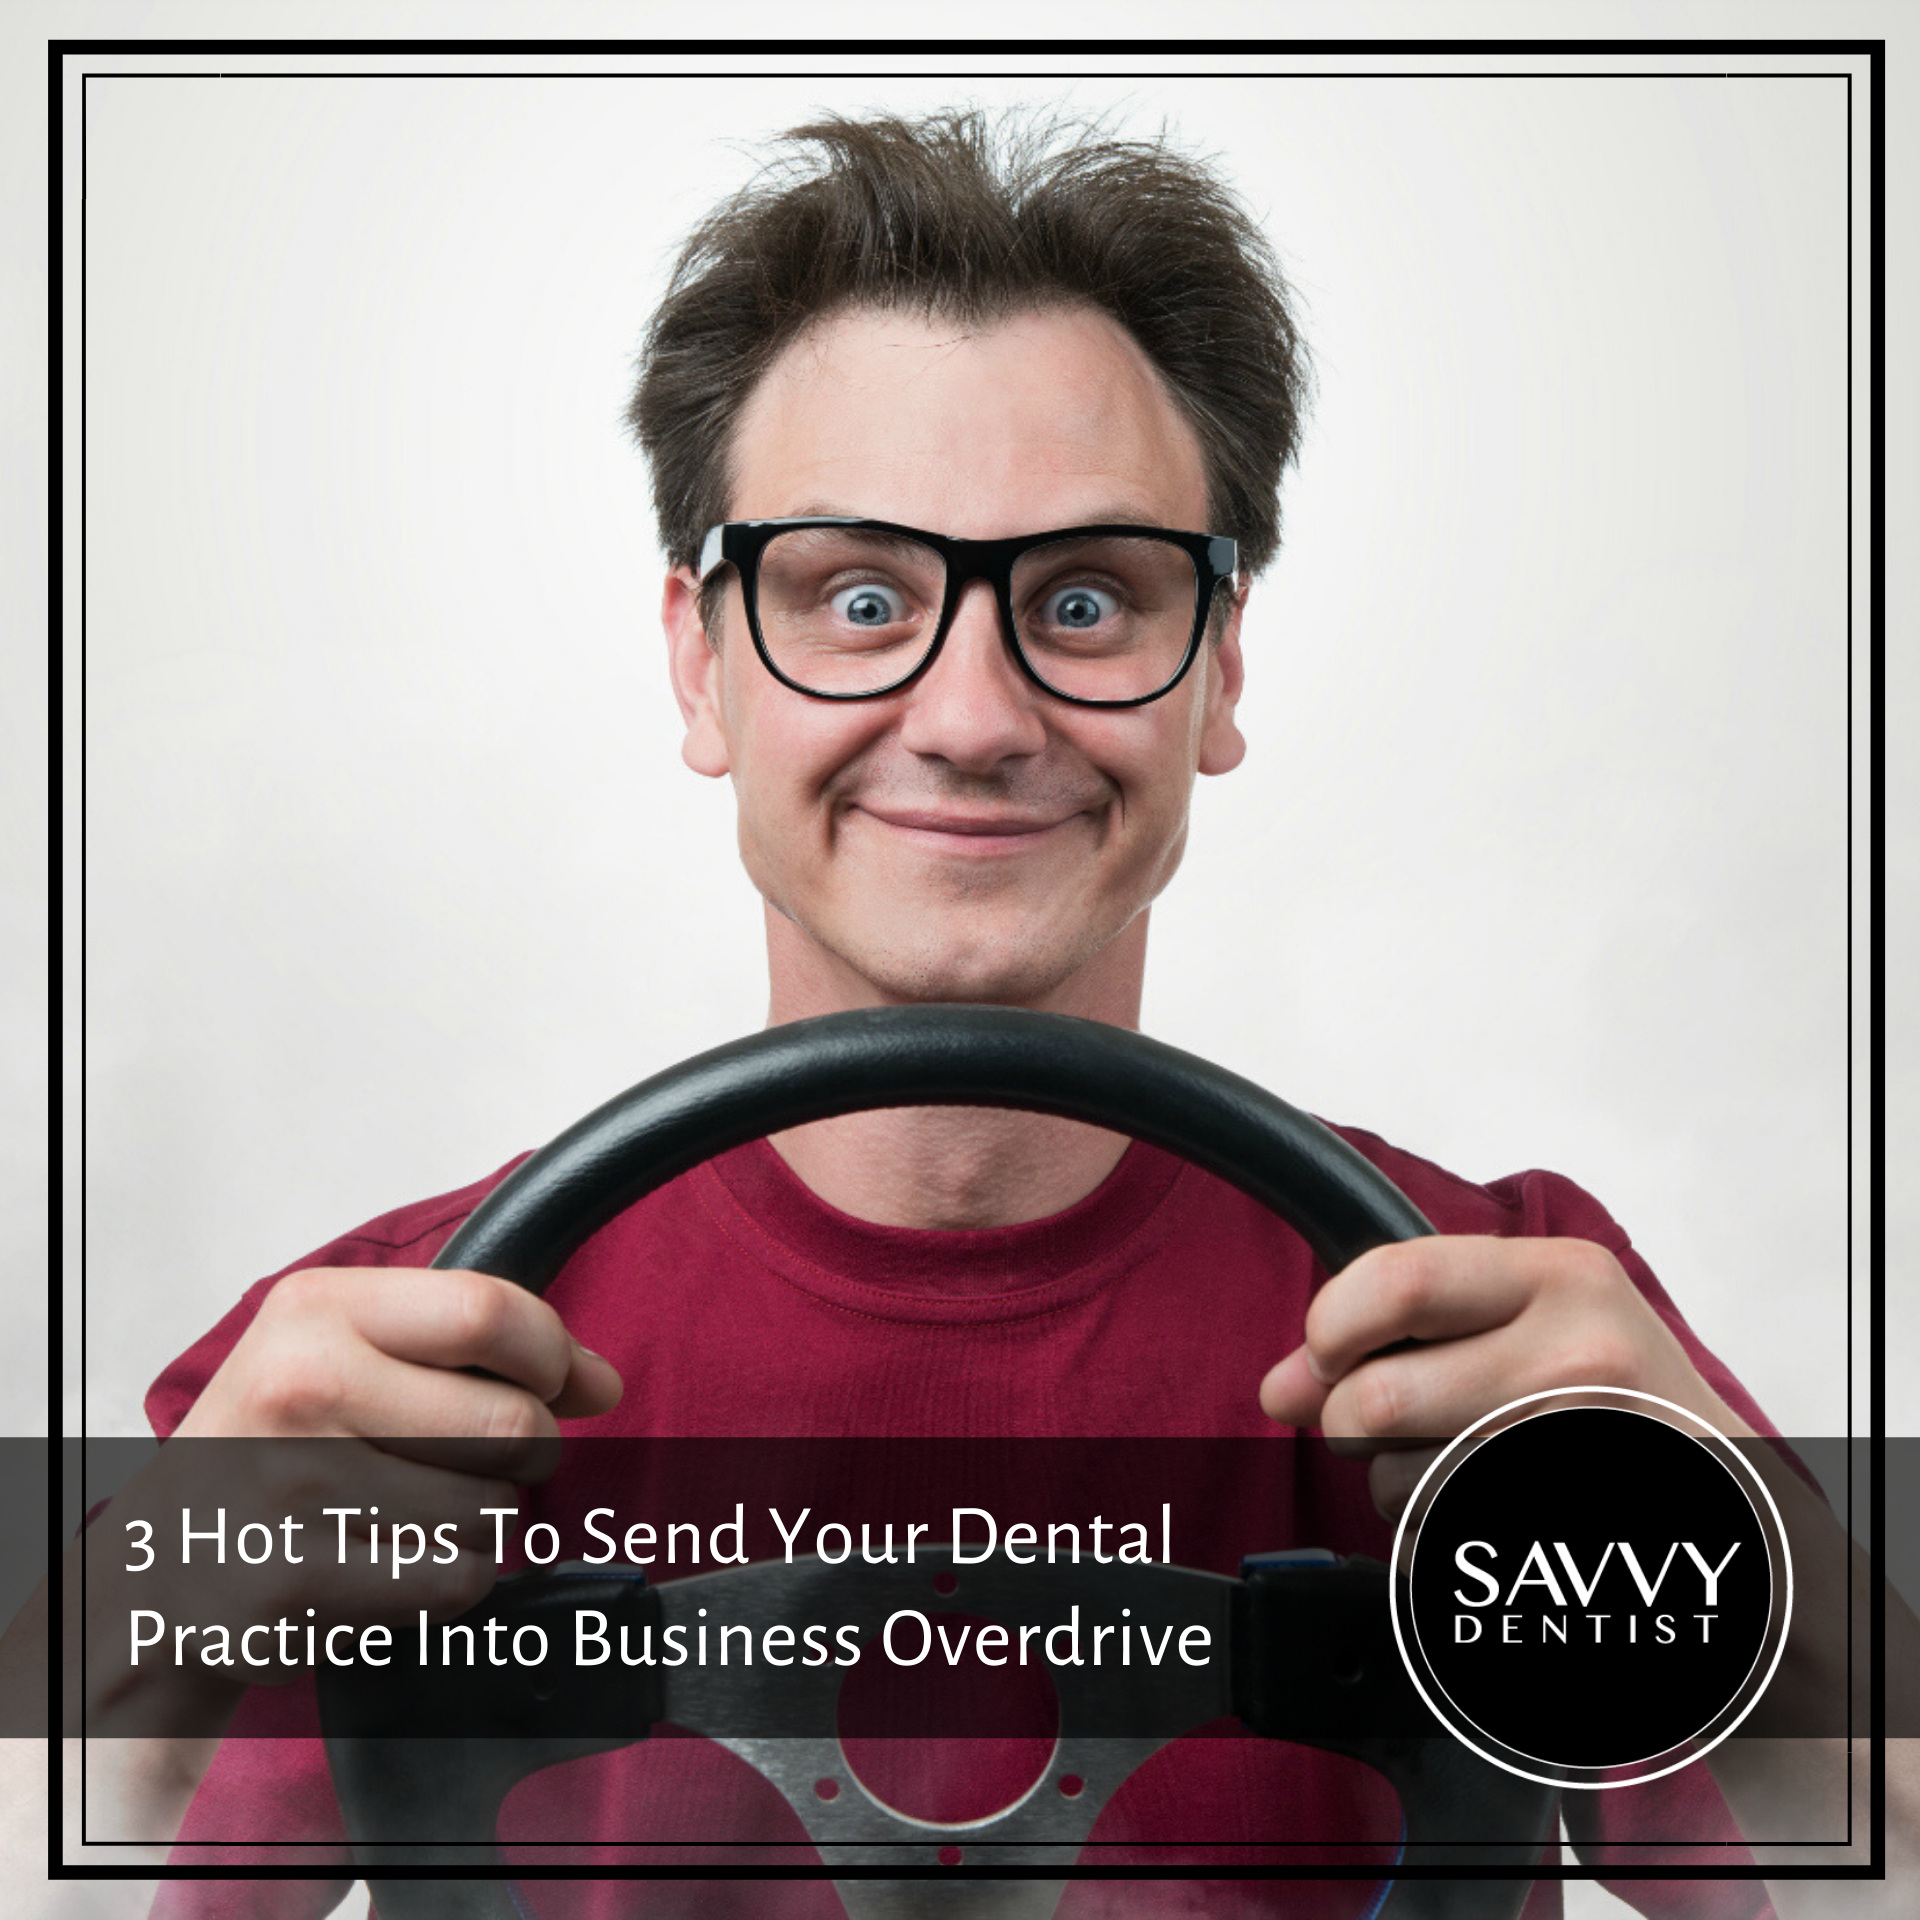 3 Hot Tips To Send Your Dental Practice Into Business Overdrive